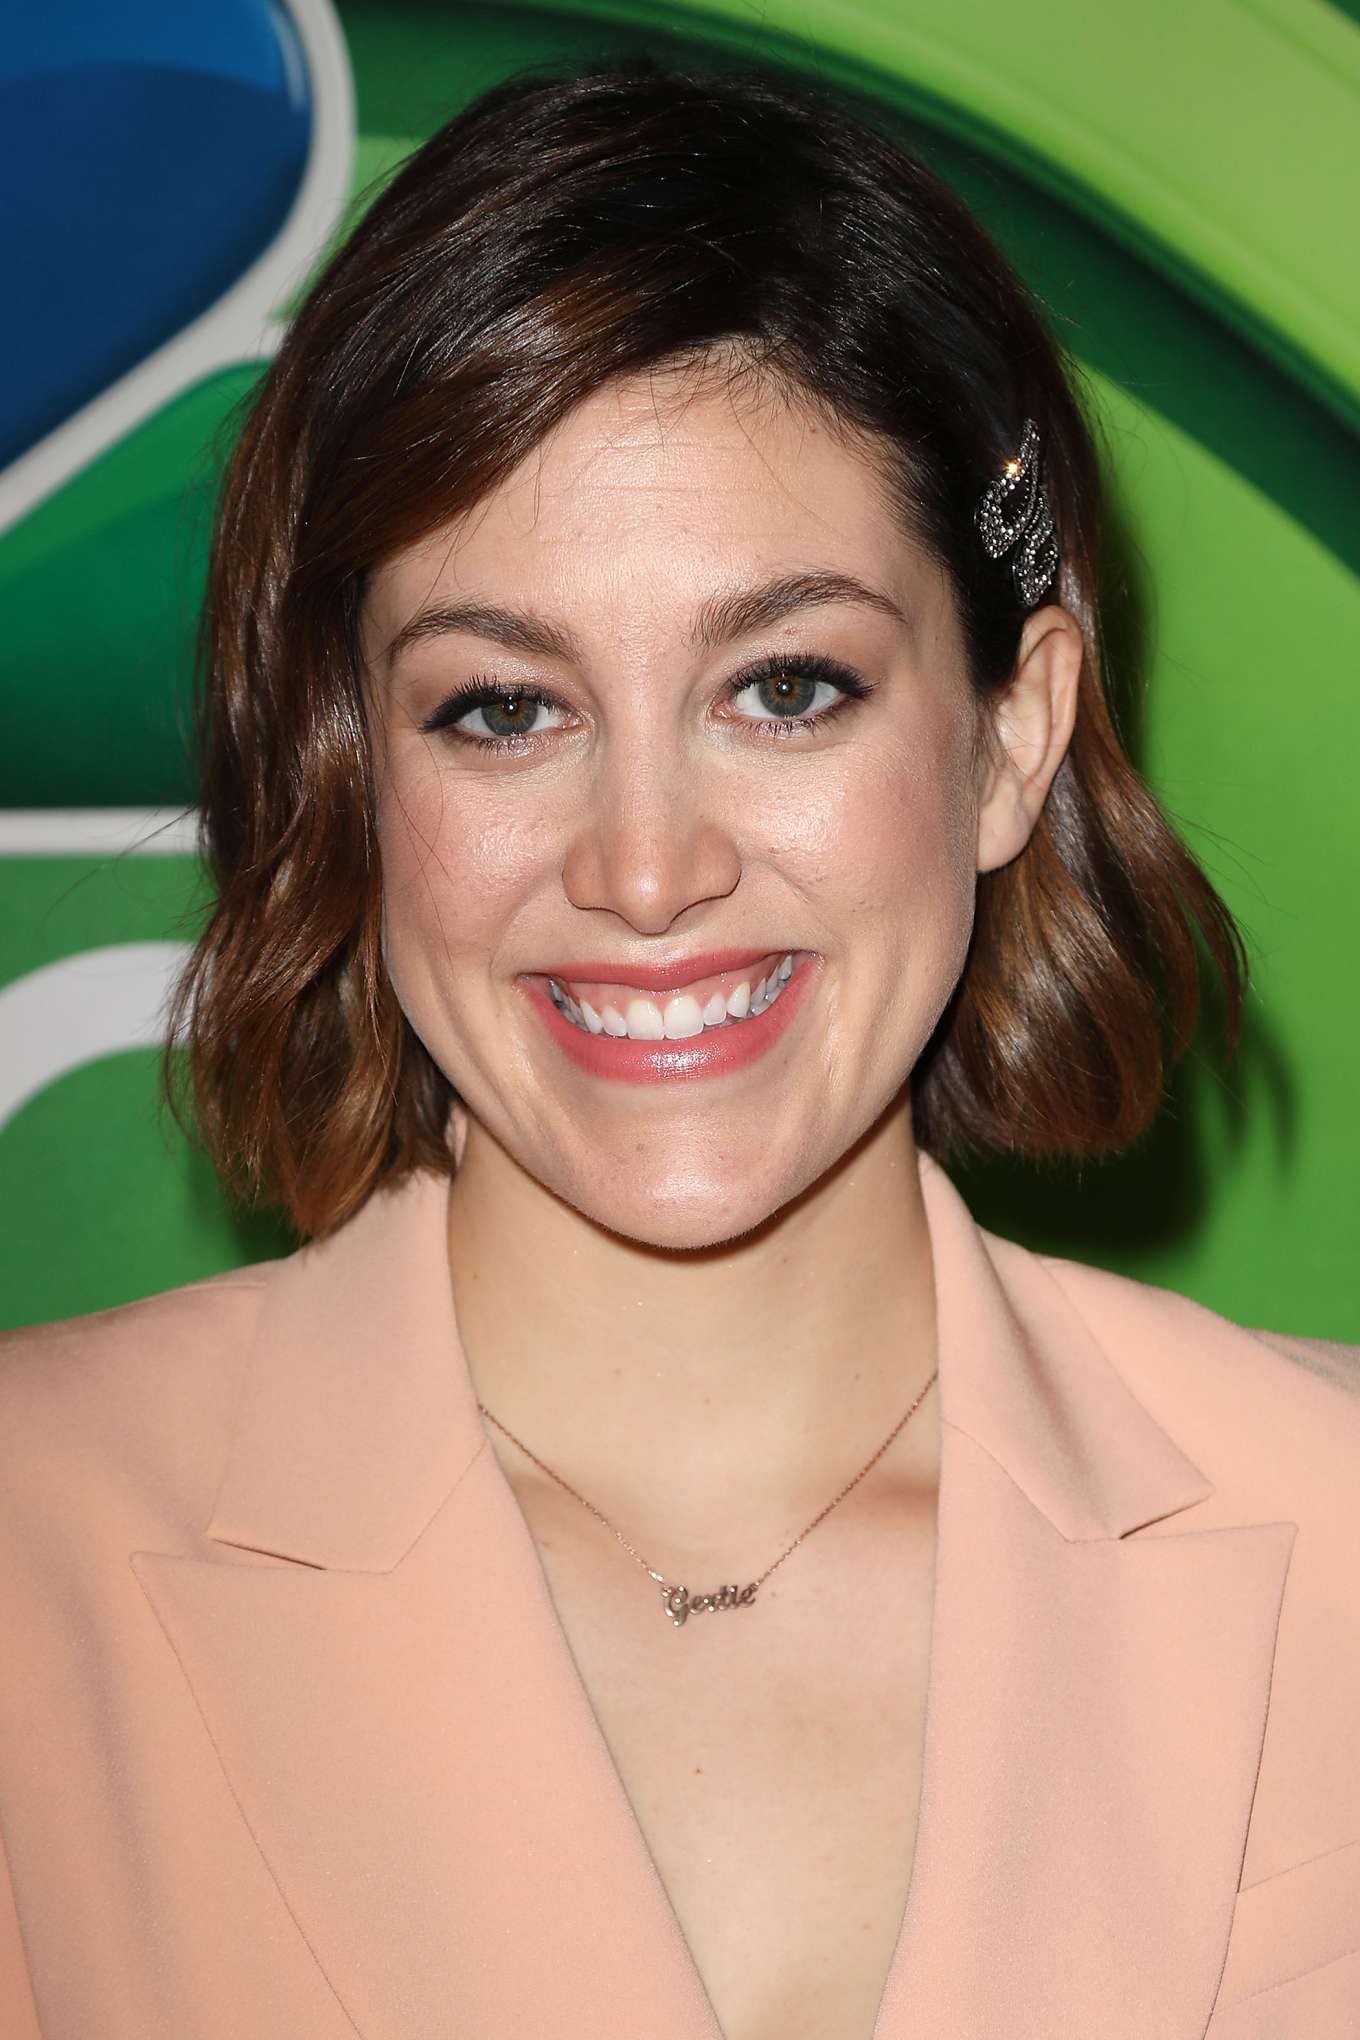 Caitlin McGee 2019 : Caitlin McGee: NBCUniversal Upfront Presentation-06. 